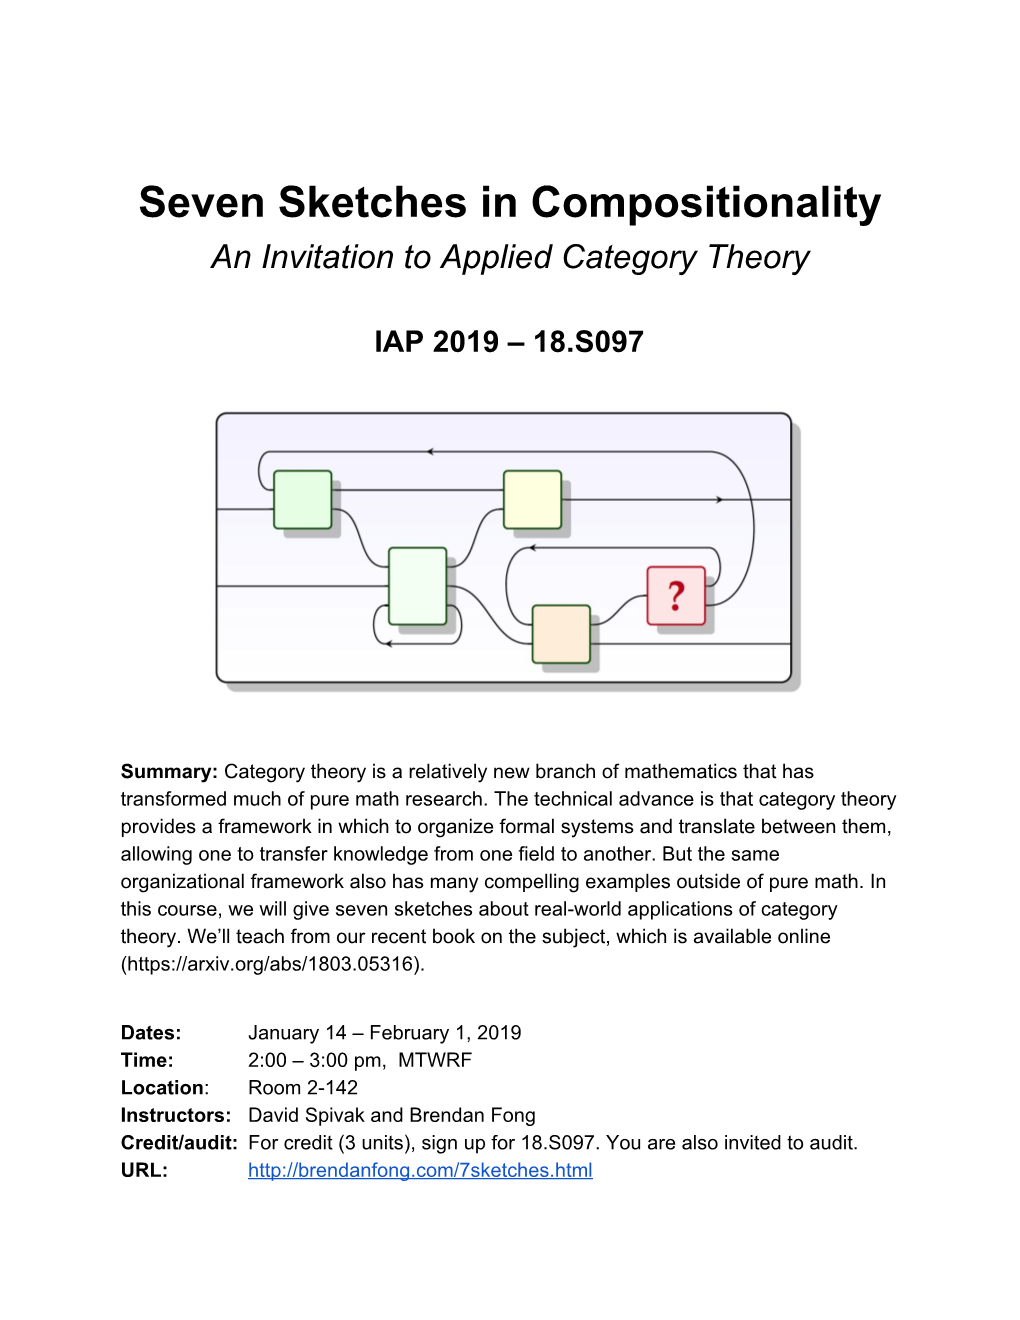 Seven Sketches in Compositionality an Invitation to Applied Category Theory